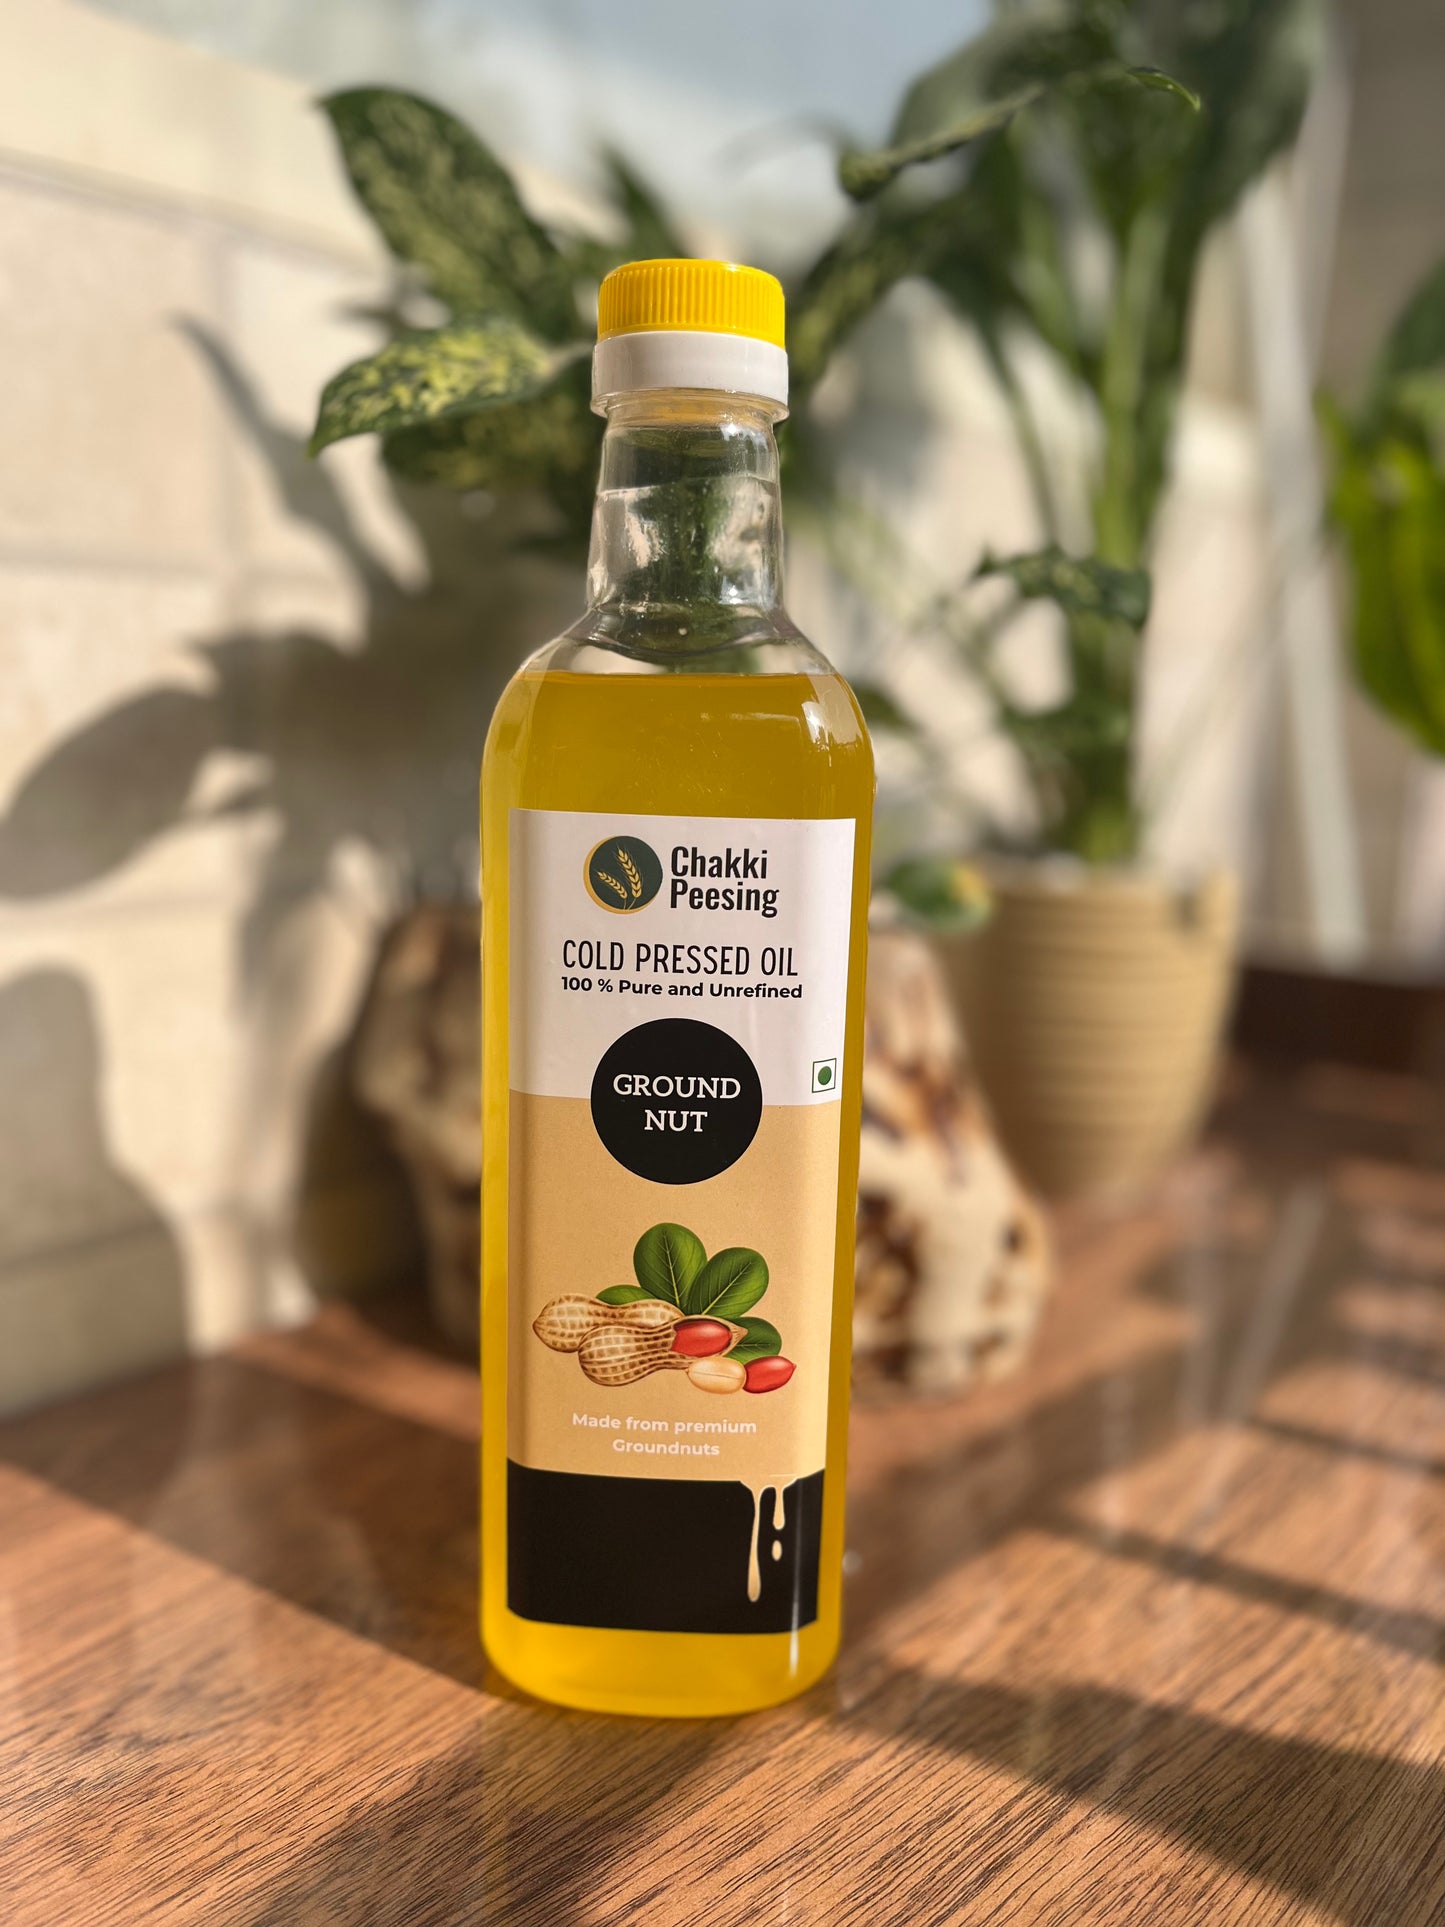 Pure Groundnut Cold Press Oil (Moongfali oil)